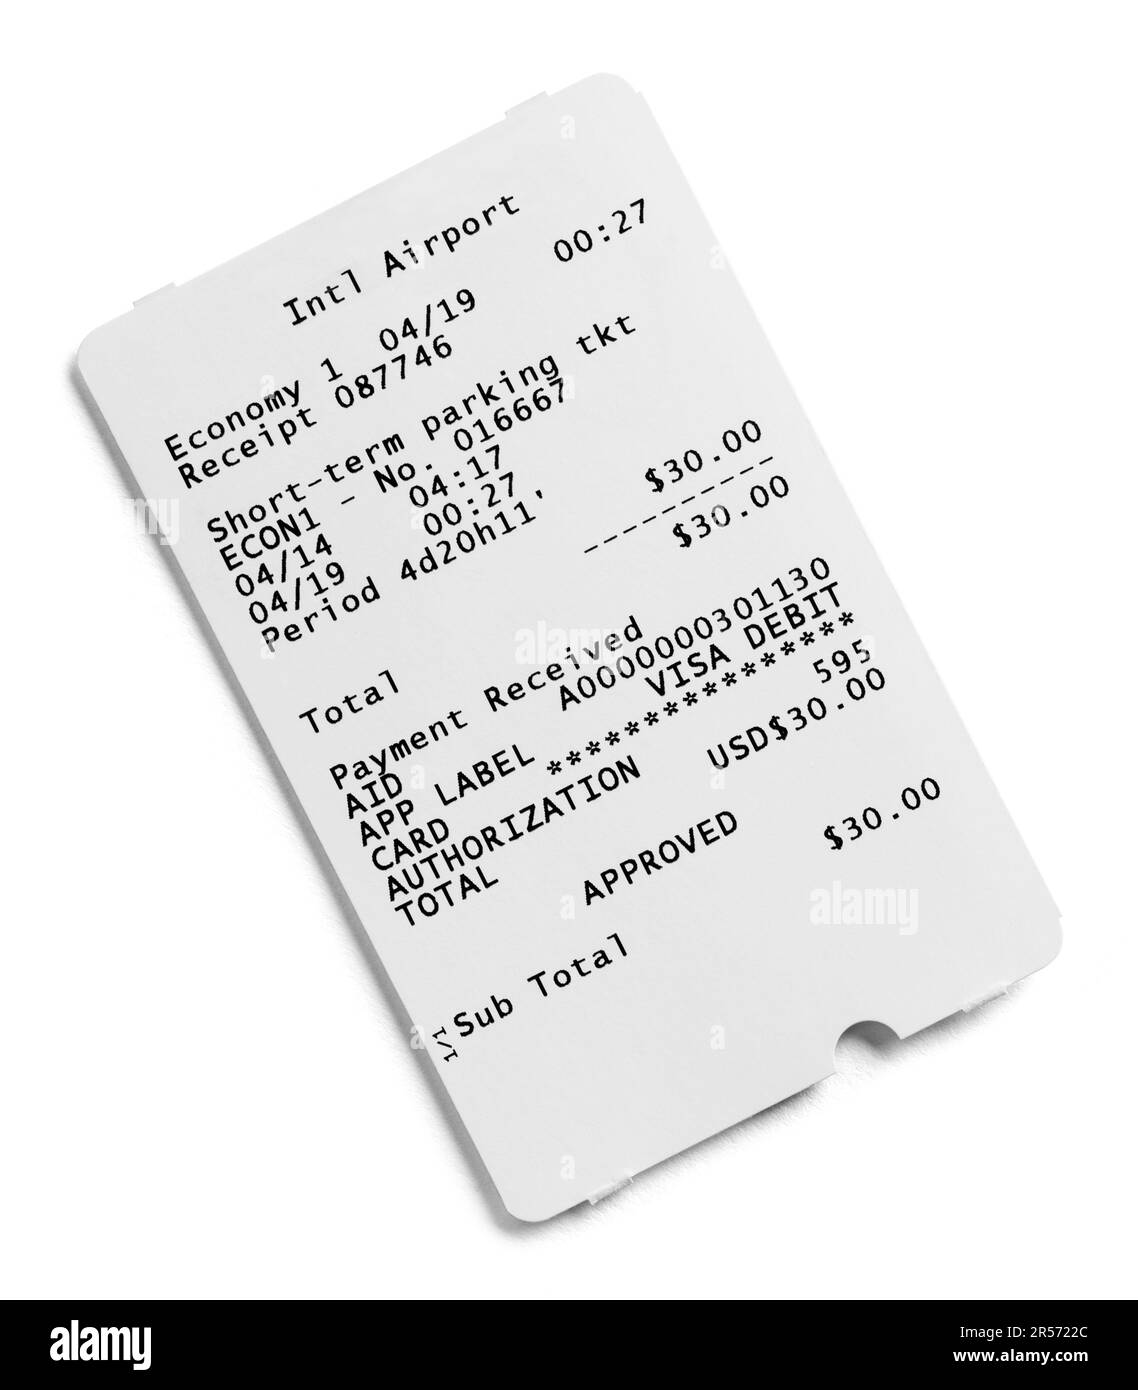 Paper Receipt for Parking Ticket Card Cut Out on White. Stock Photo